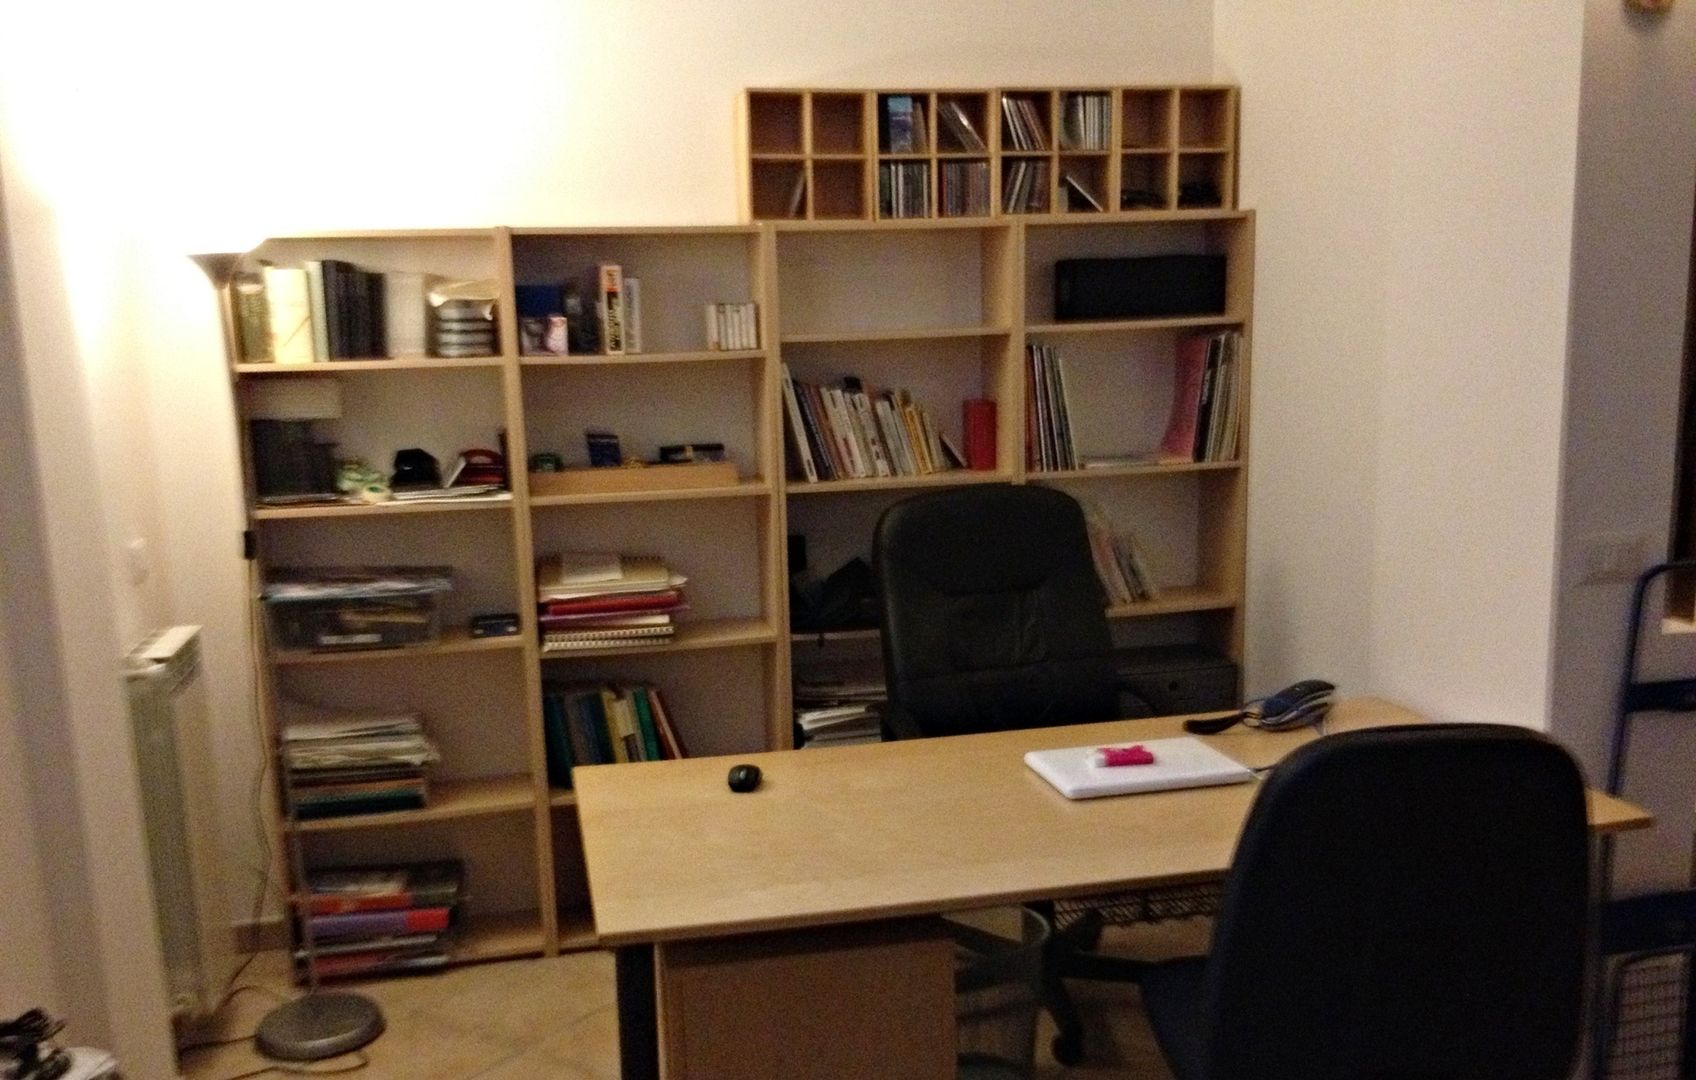 Home relooking: intervento su una sala hobby, LET'S HOME LET'S HOME Study/office